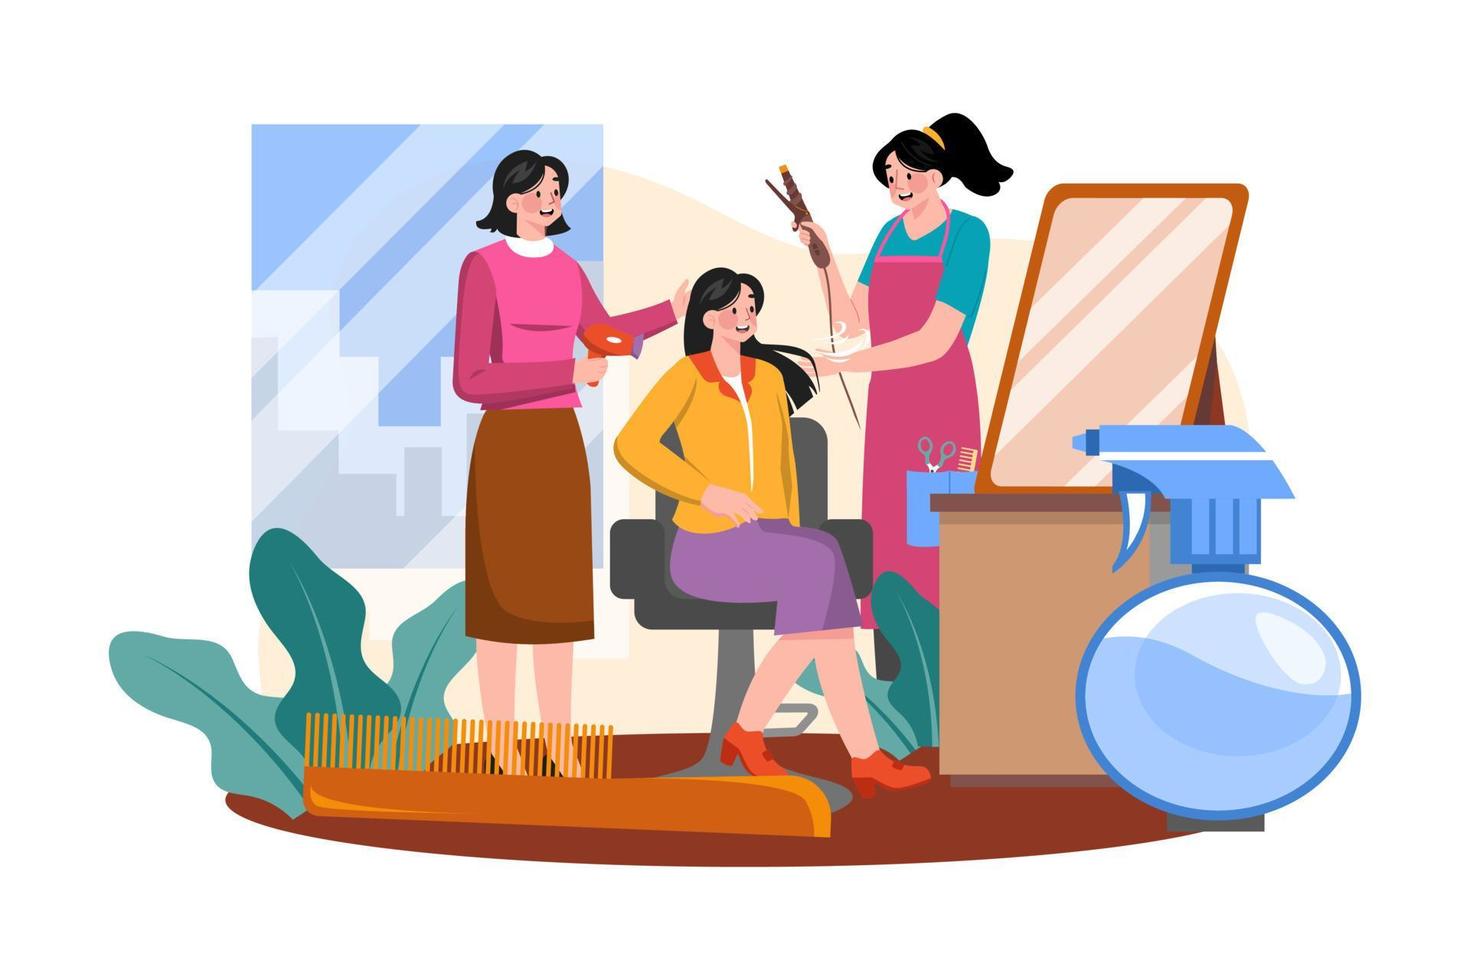 Hairdresser Dry A New Hairstyle For A Customer At A Hair Salon. vector